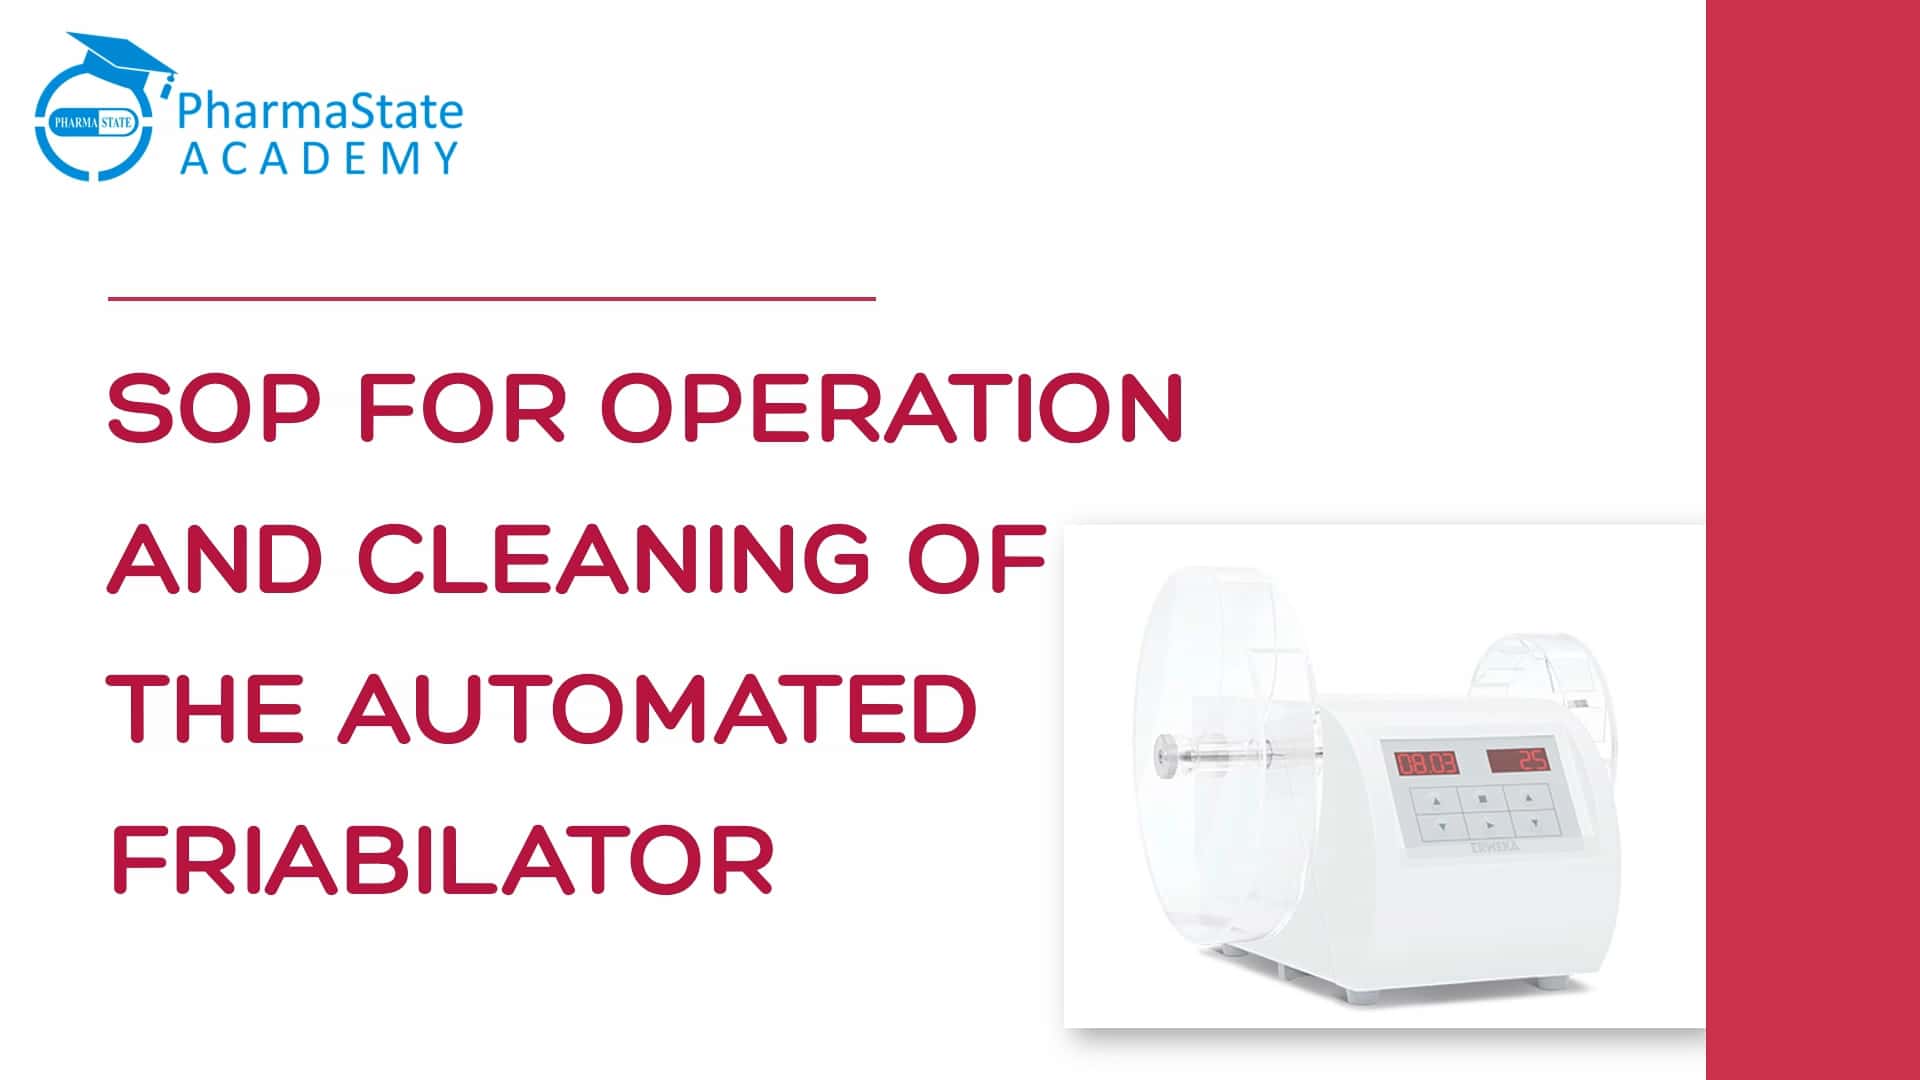 SOP For Operation And Cleaning of The Automated Friabilator